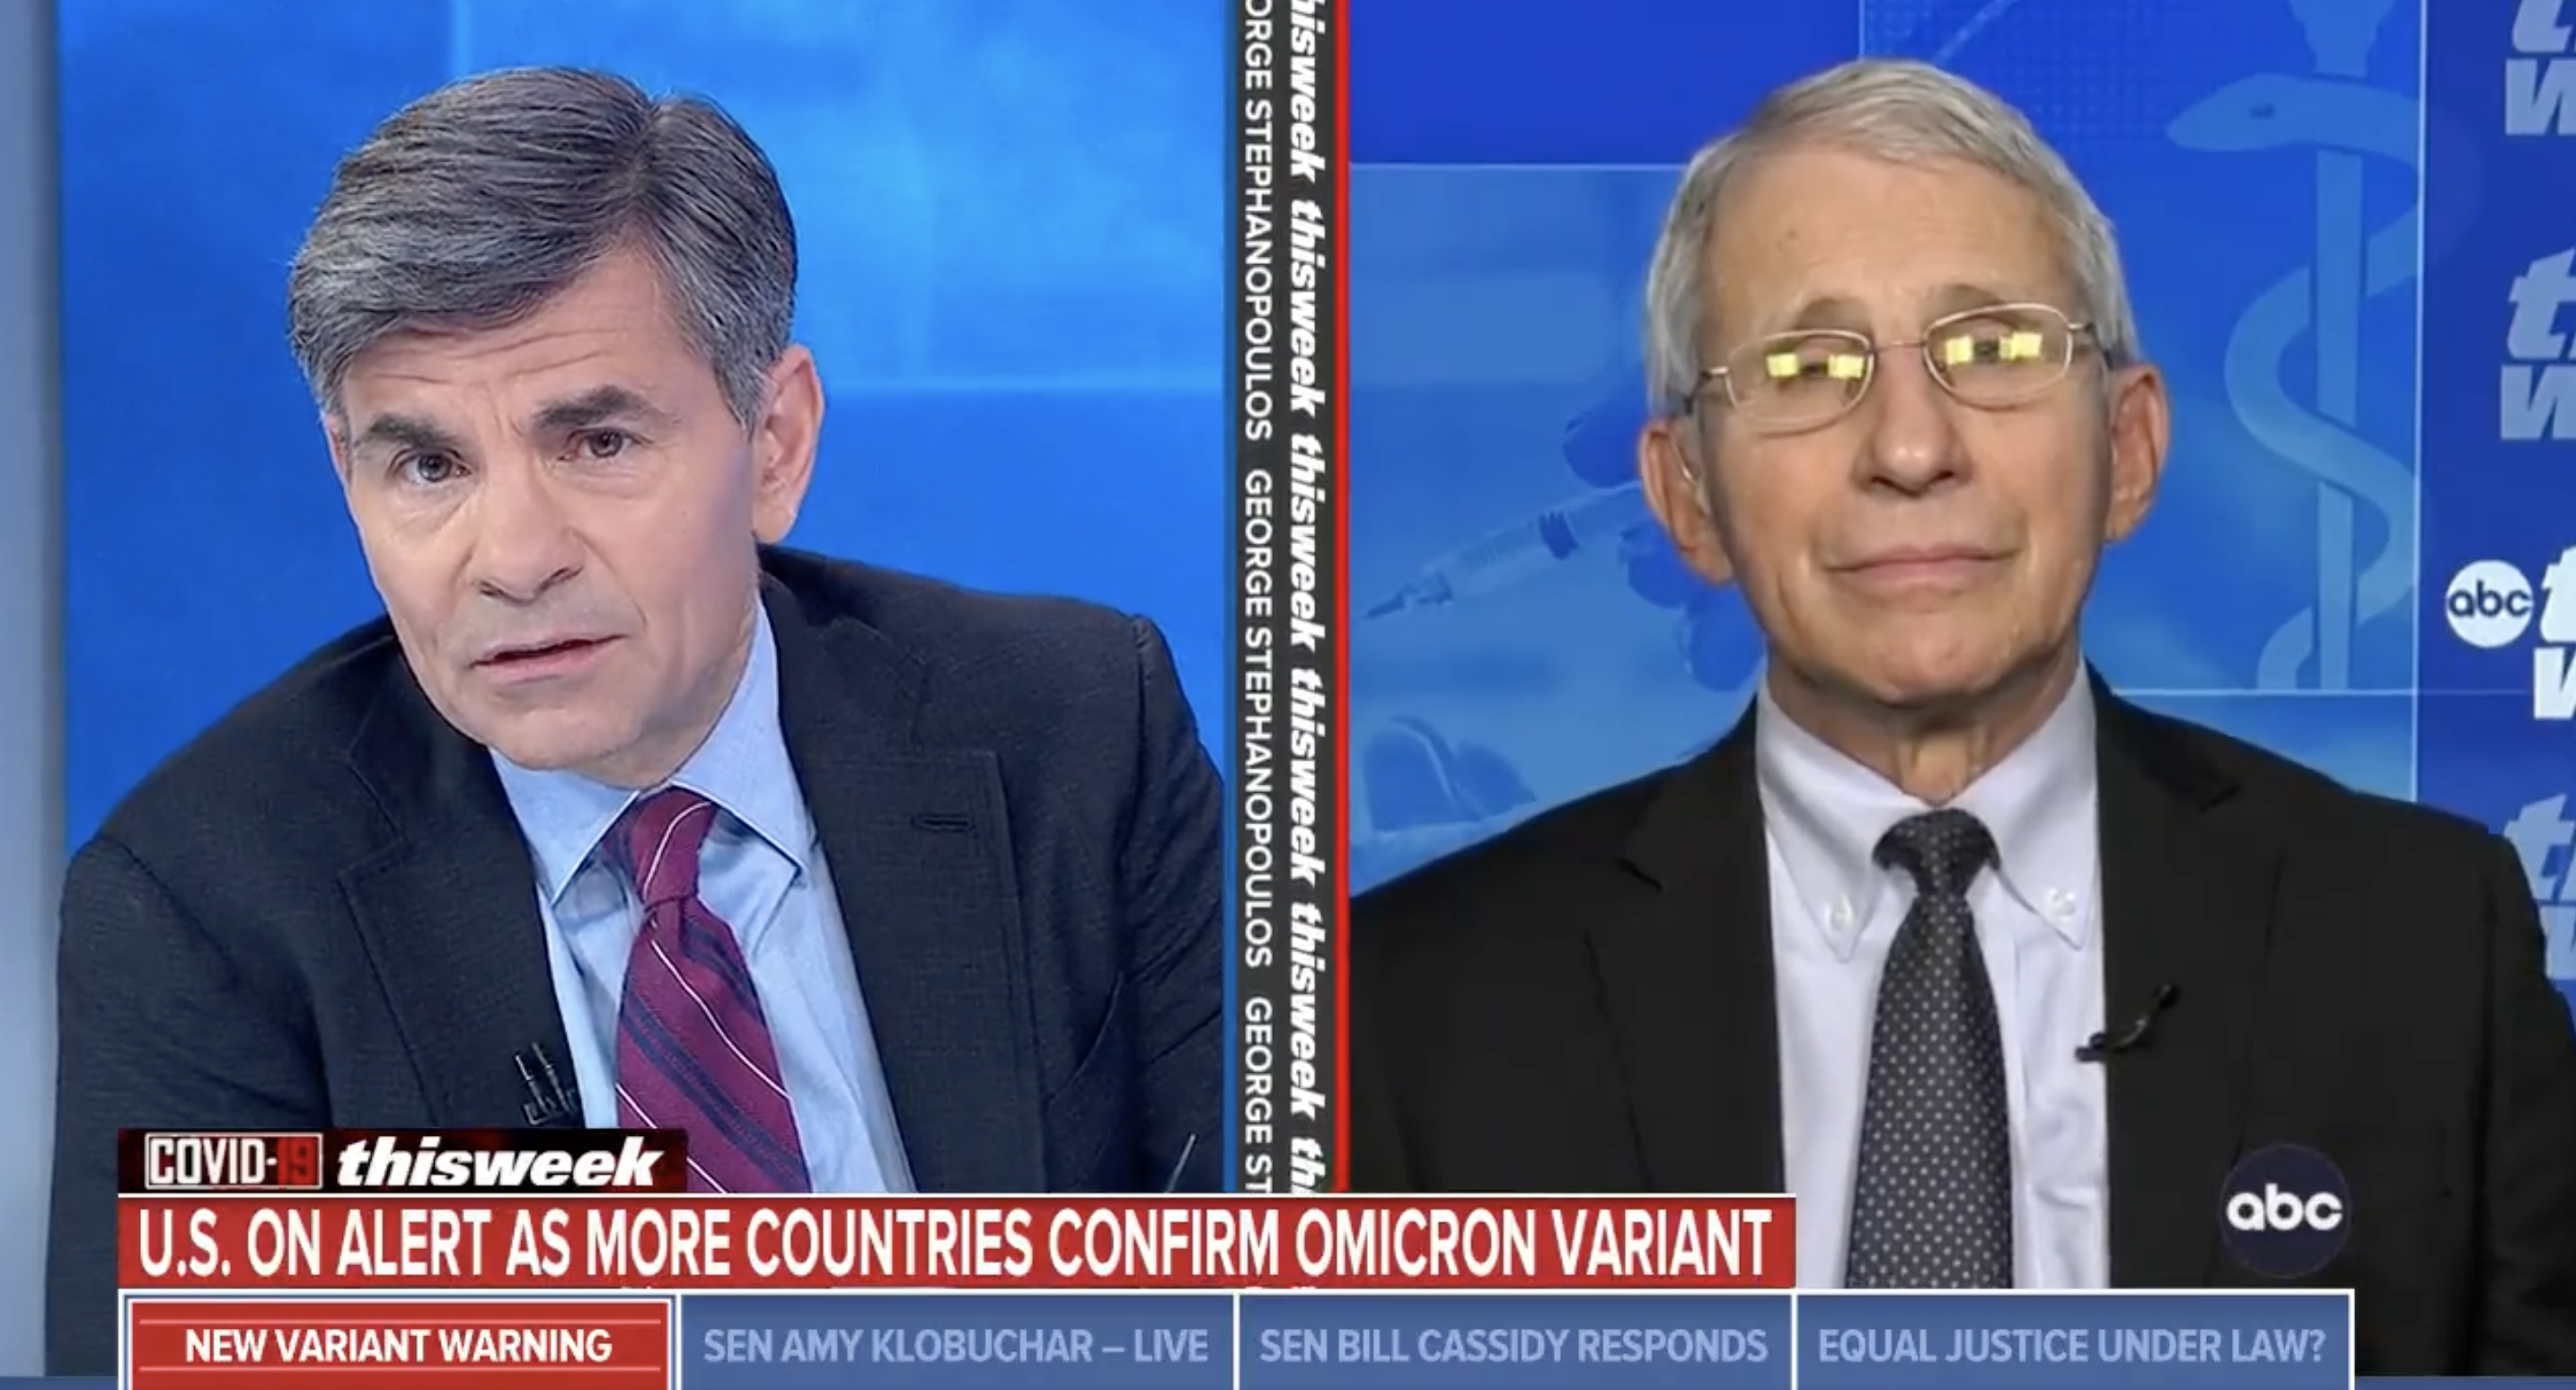 Dr. Fauci on New Covid-19 Variant